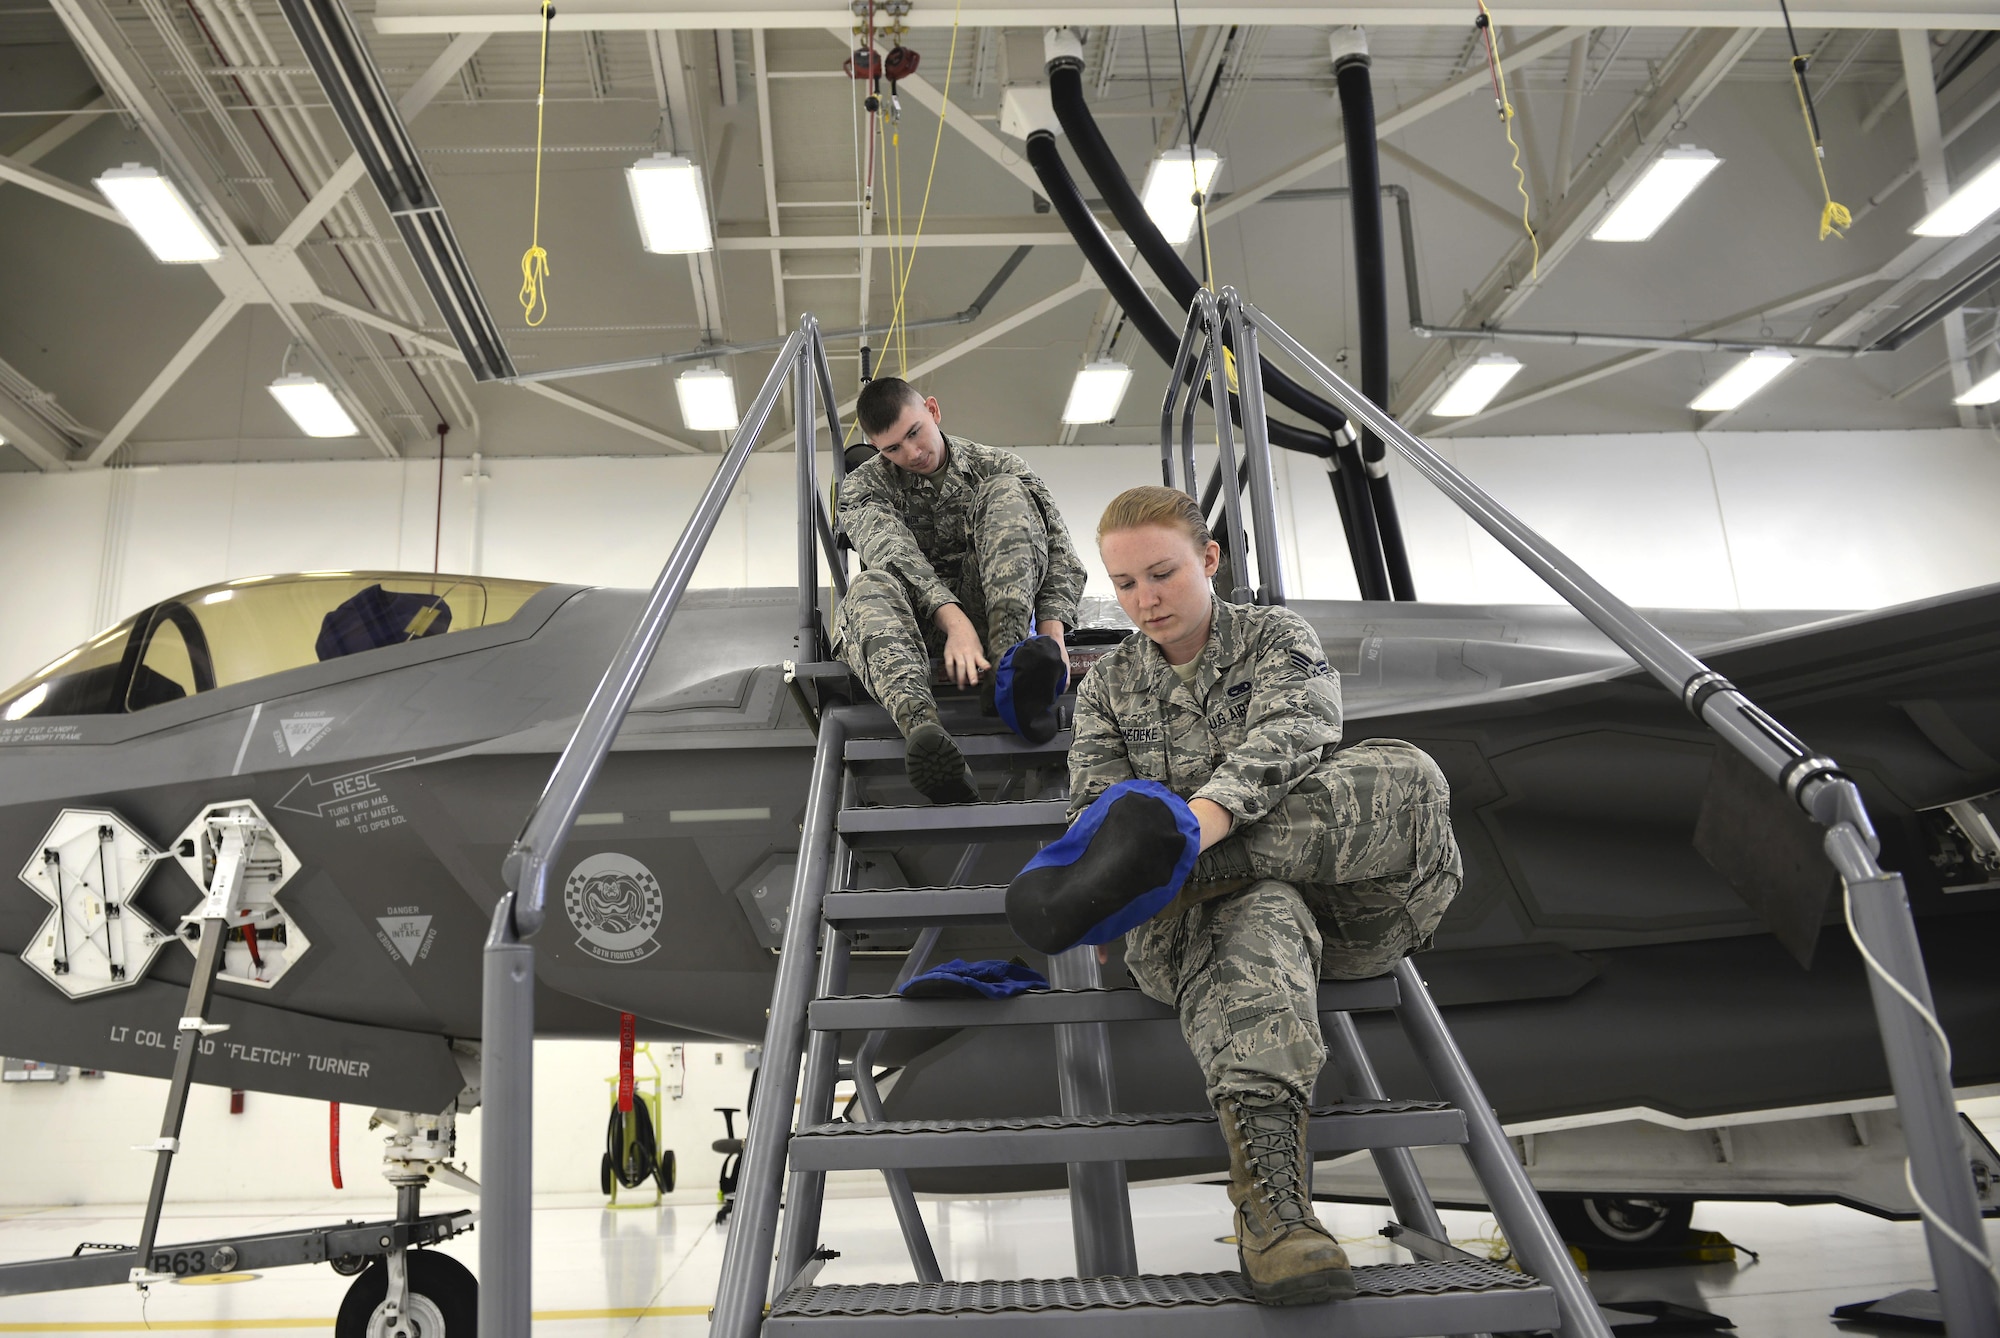 (Right) Senior Airman Samantha Schmedeke, 33rd Maintenance Squadron fuel systems journeyman, and (Left) Airman 1st Class William Manion, 33rd MXS fuel systems apprentice, put on booties before walking atop an F-35A Lightning II to perform maintenance at Eglin Air Force Base, Fla., May 16, 2016. Fuel systems specialists wear these protective coverings to avoid scuffing the low observable paint, which is part of the stealth effect on the jet. (U.S. Air Force photo/Senior Airman Andrea Posey)